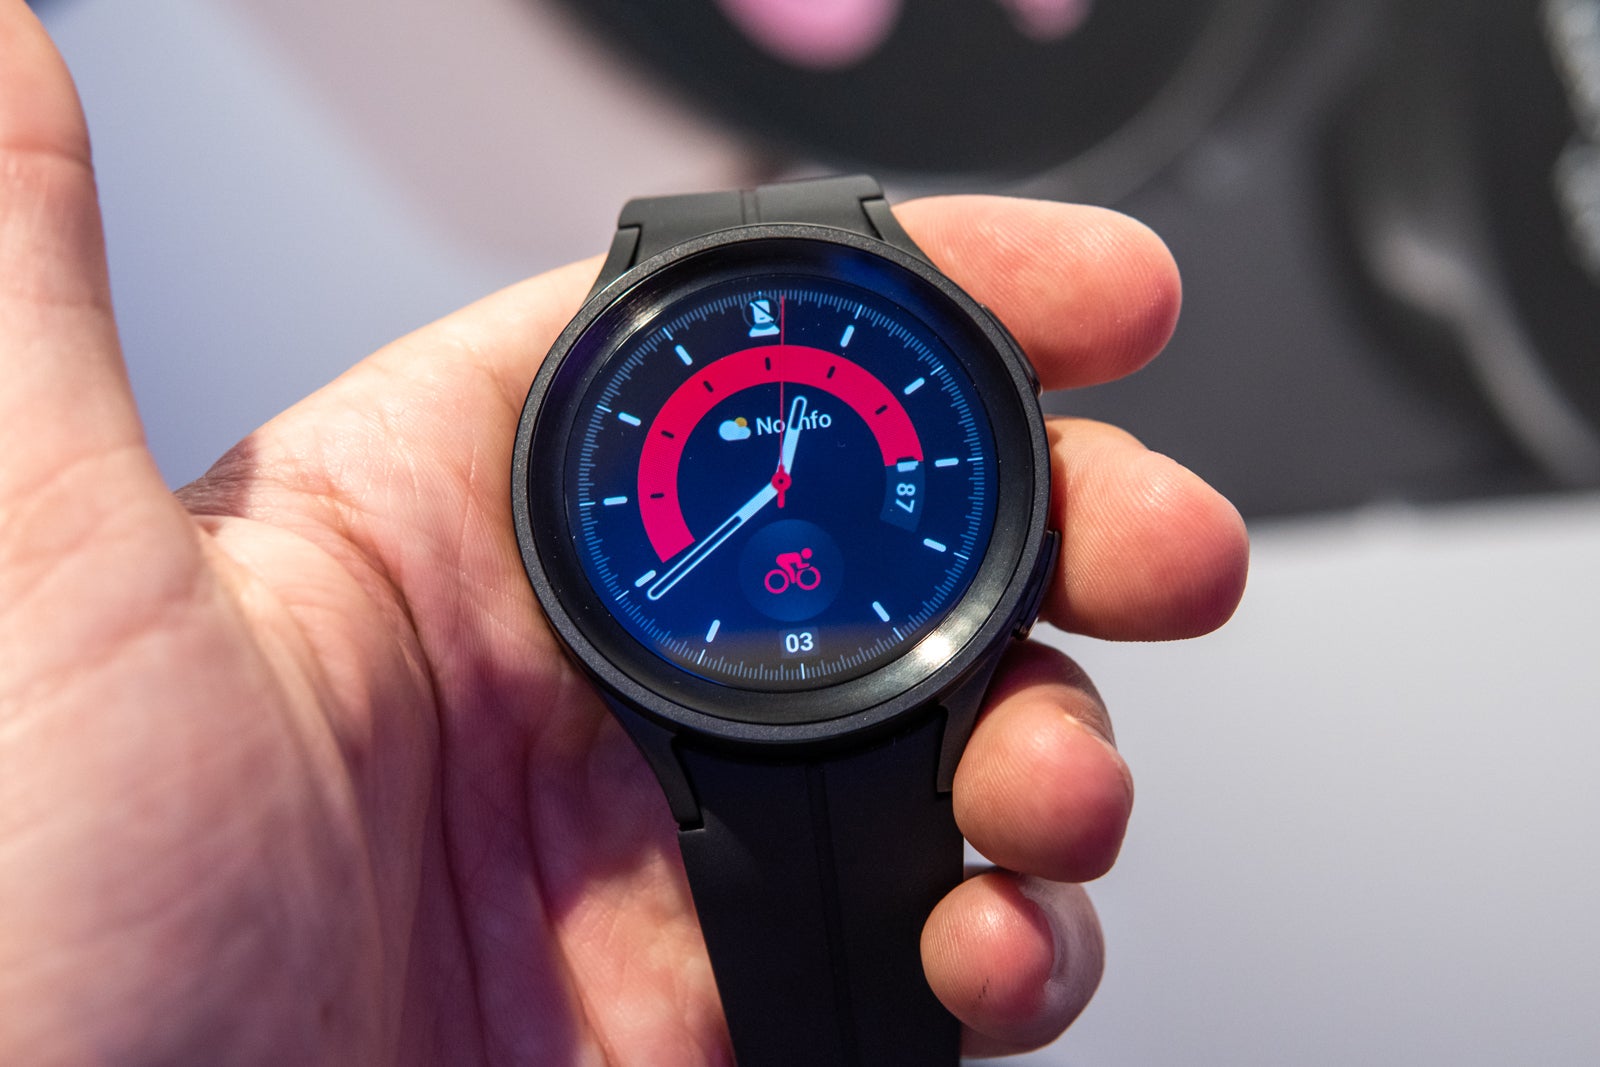 Samsung Galaxy Watch 5 Pro - Galaxy Watch 5 Pro hands-on review